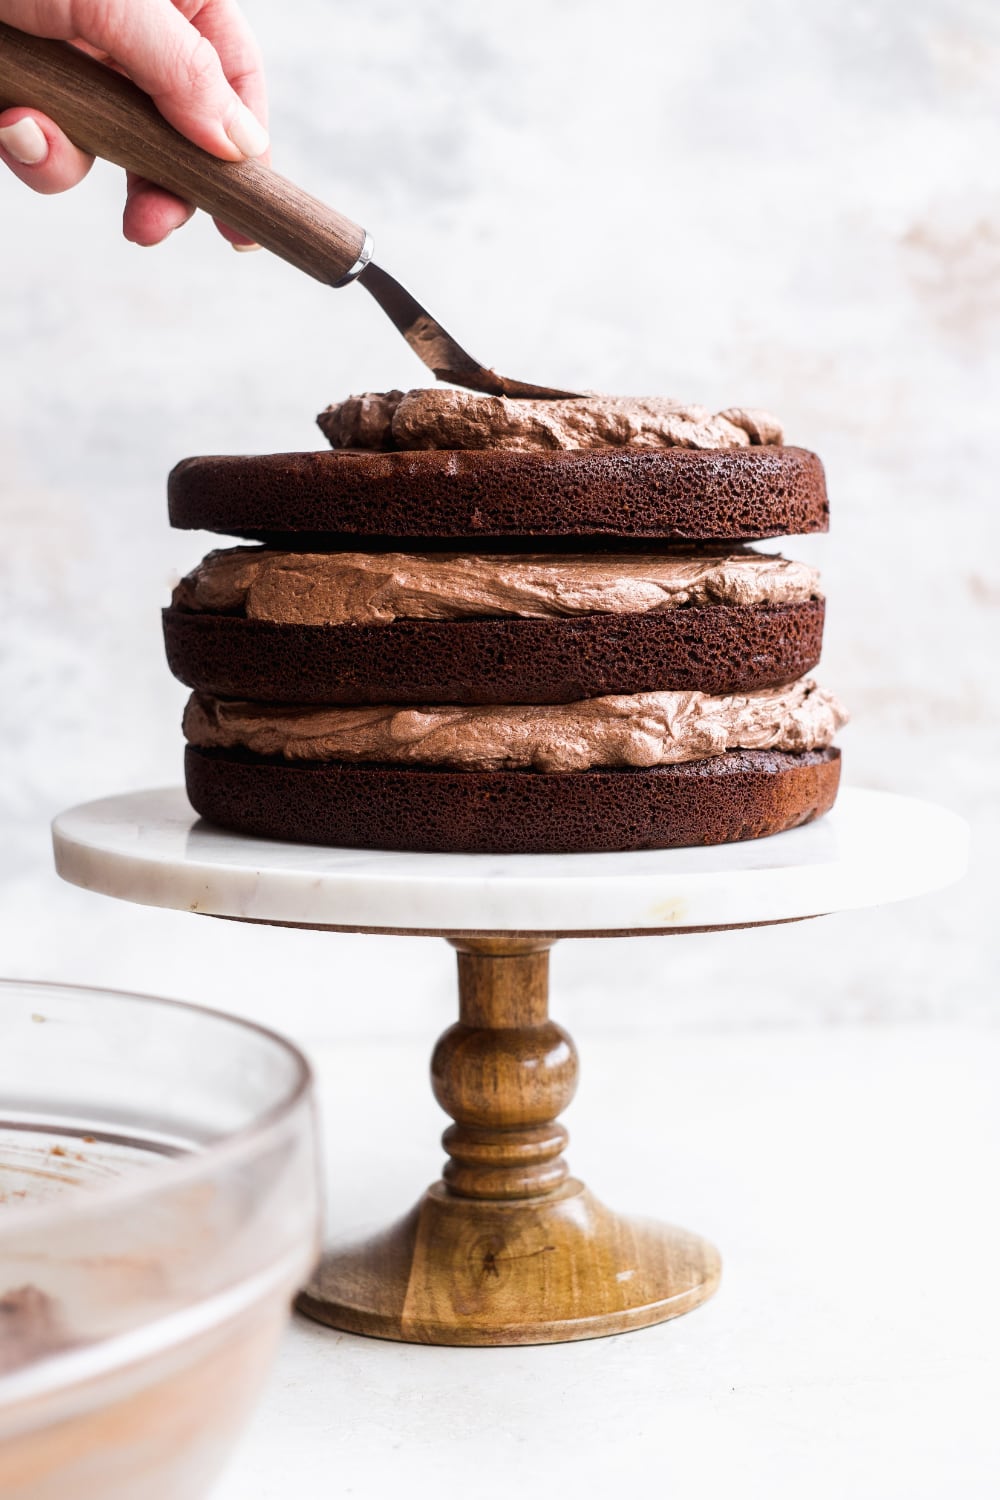 Layers of chocolate cake being stacked and frosted on a cake stand.